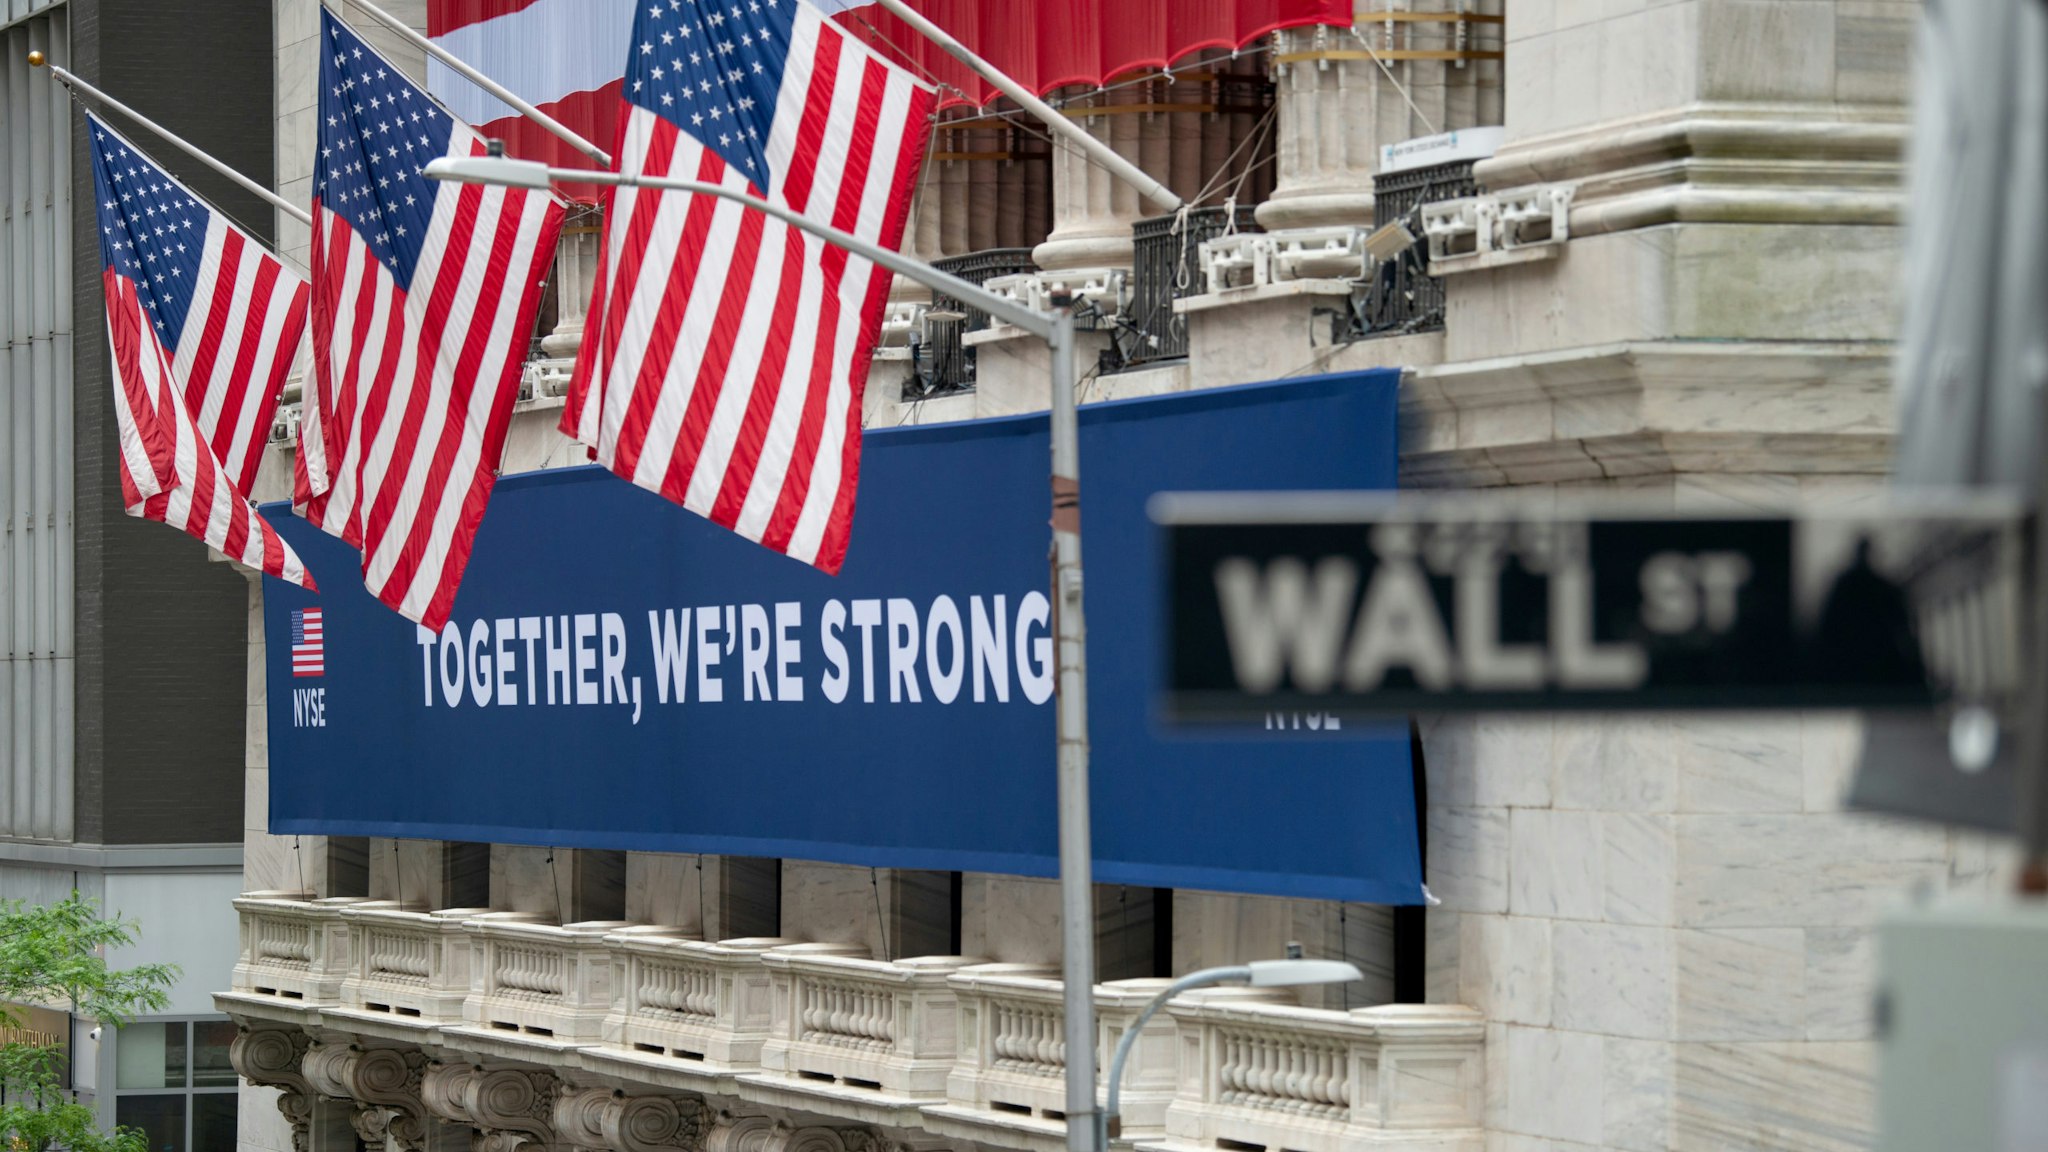 NEW YORK, NEW YORK - MAY 28: A view of the "Together, We're Strong" banner in front of the New York Stock Exchange on May 28, 2020 in New York City. The NYSE partially reopened its trading floor on May 25th after a two-month closure due to the COVID-19 pandemic. Government guidelines encourage wearing a mask in public with strong social distancing in effect as all 50 states in the USA have begun a gradual process to slowly reopen after weeks of stay-at-home measures to slow the spread of COVID-19. (Photo by Alexi Rosenfeld/Getty Images)